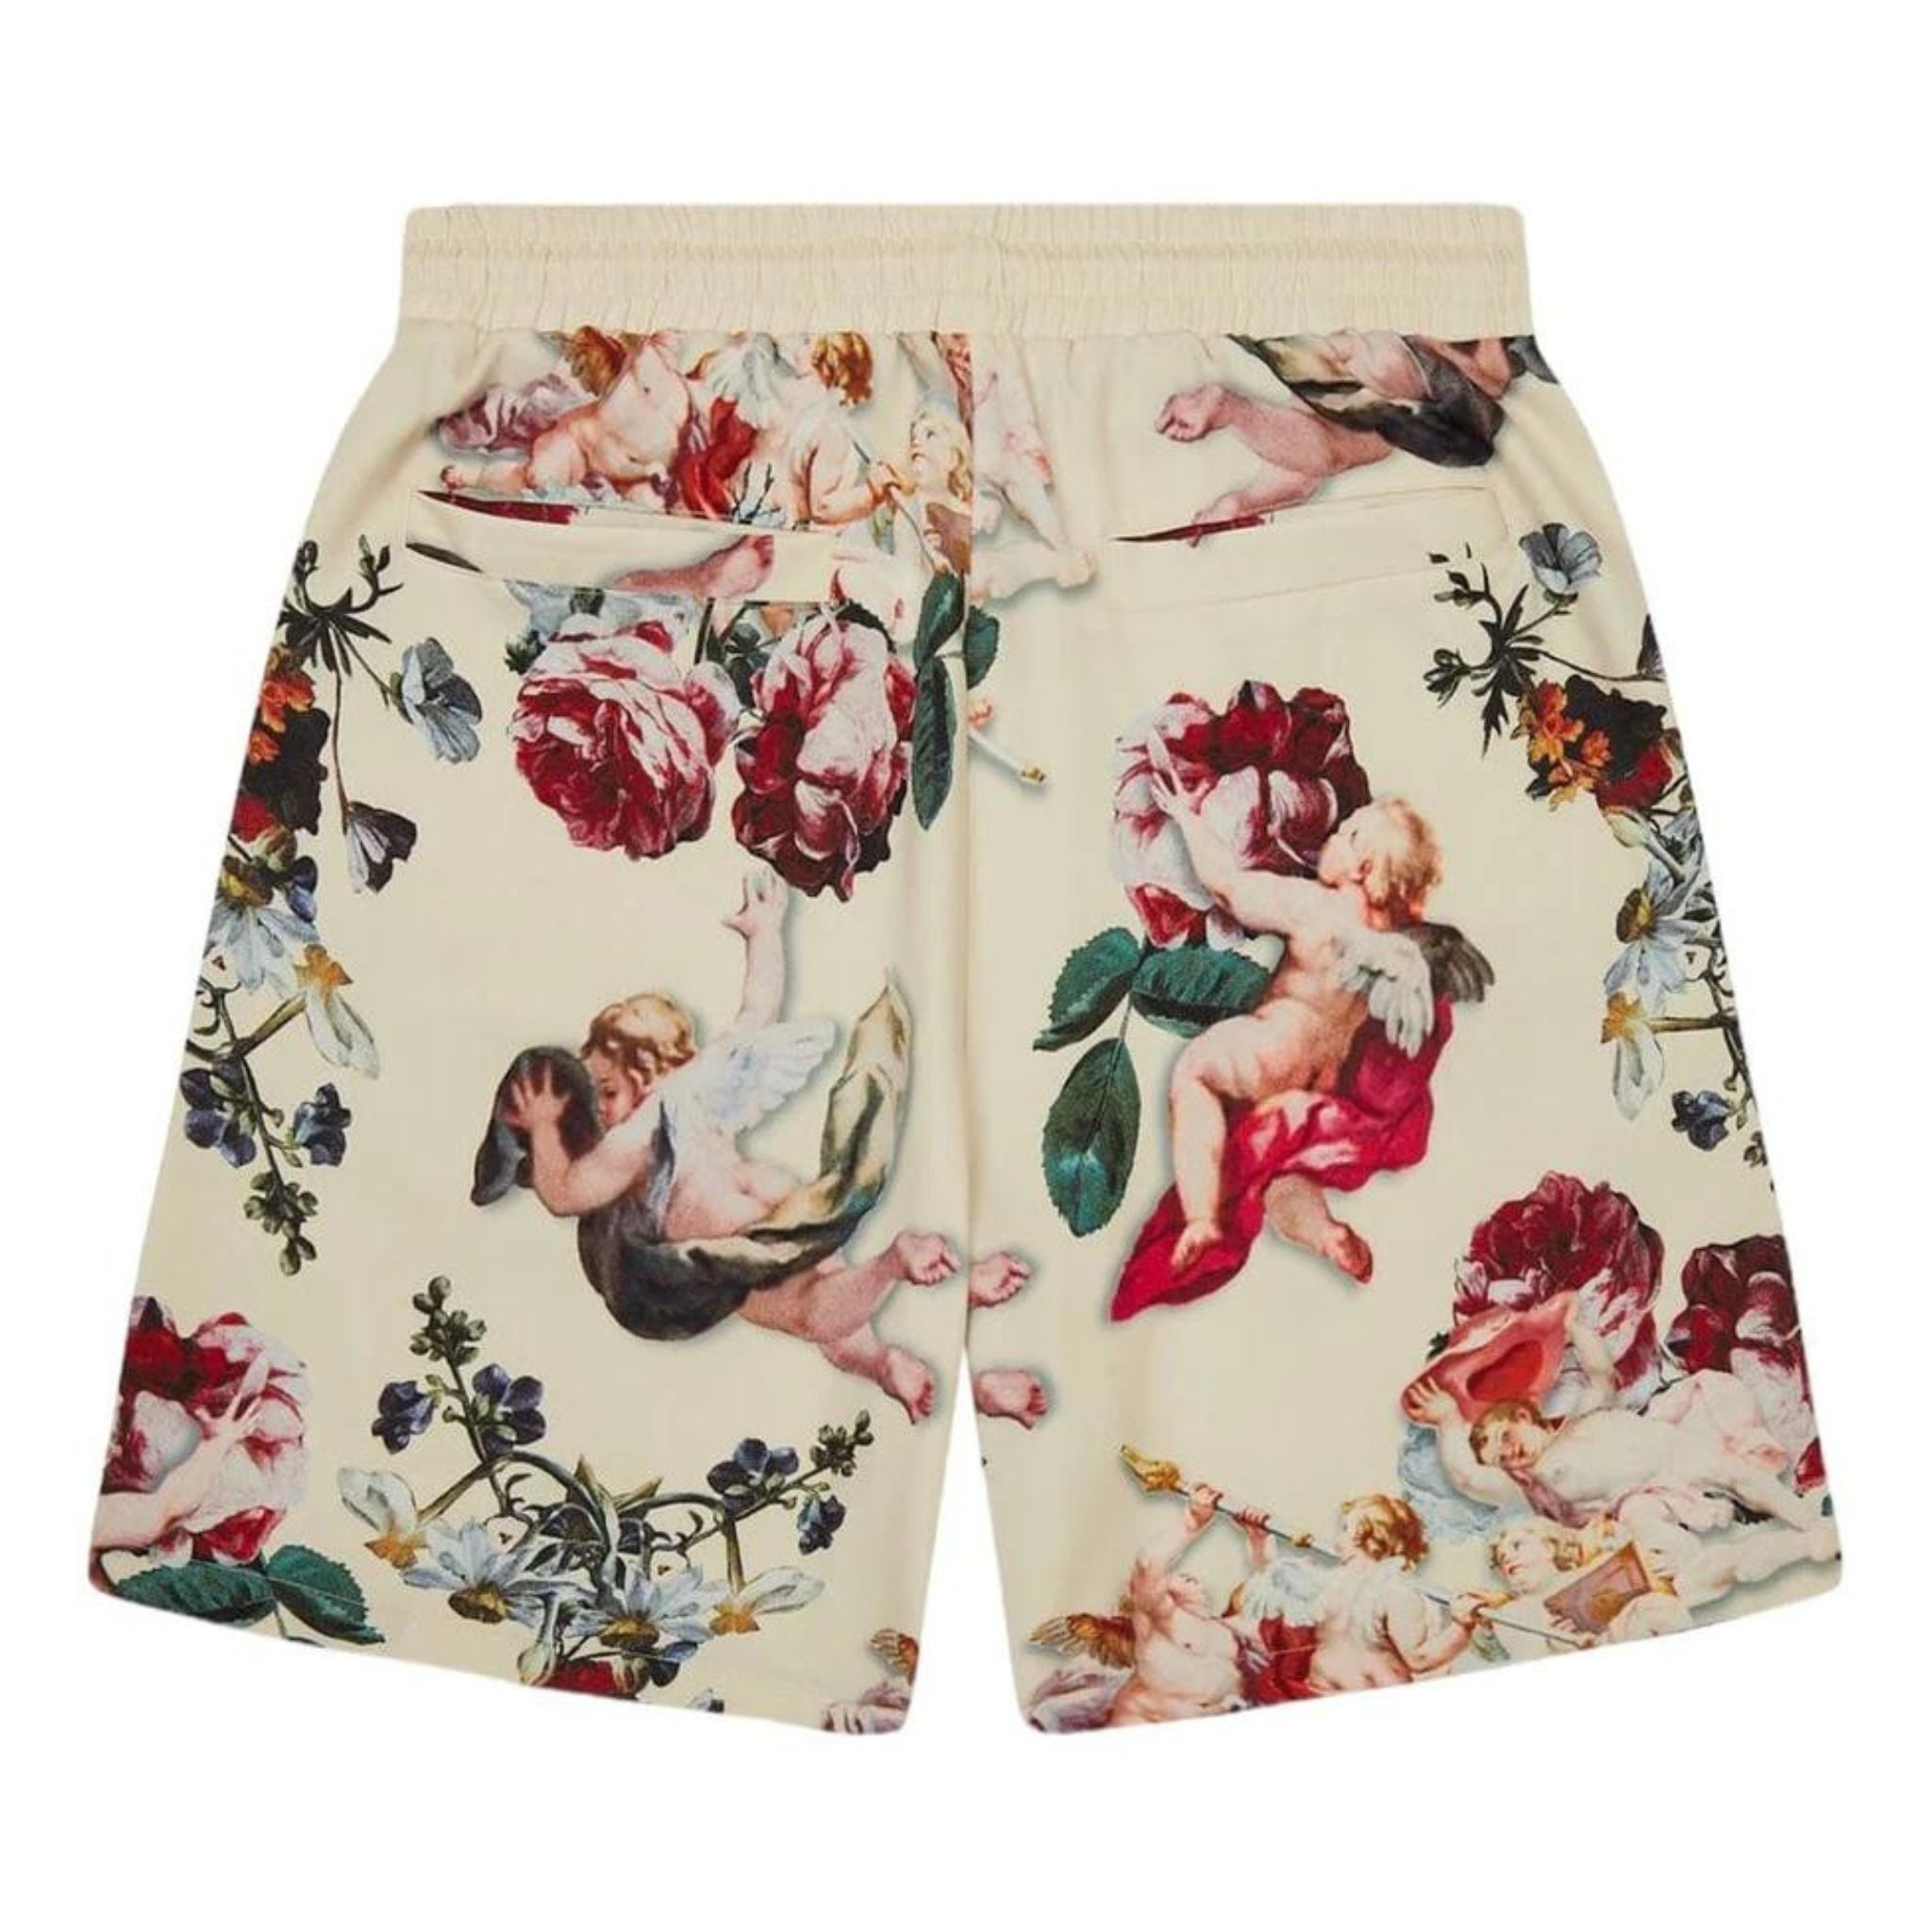 ALMOST SOMEDAY ANGELS SHORTS